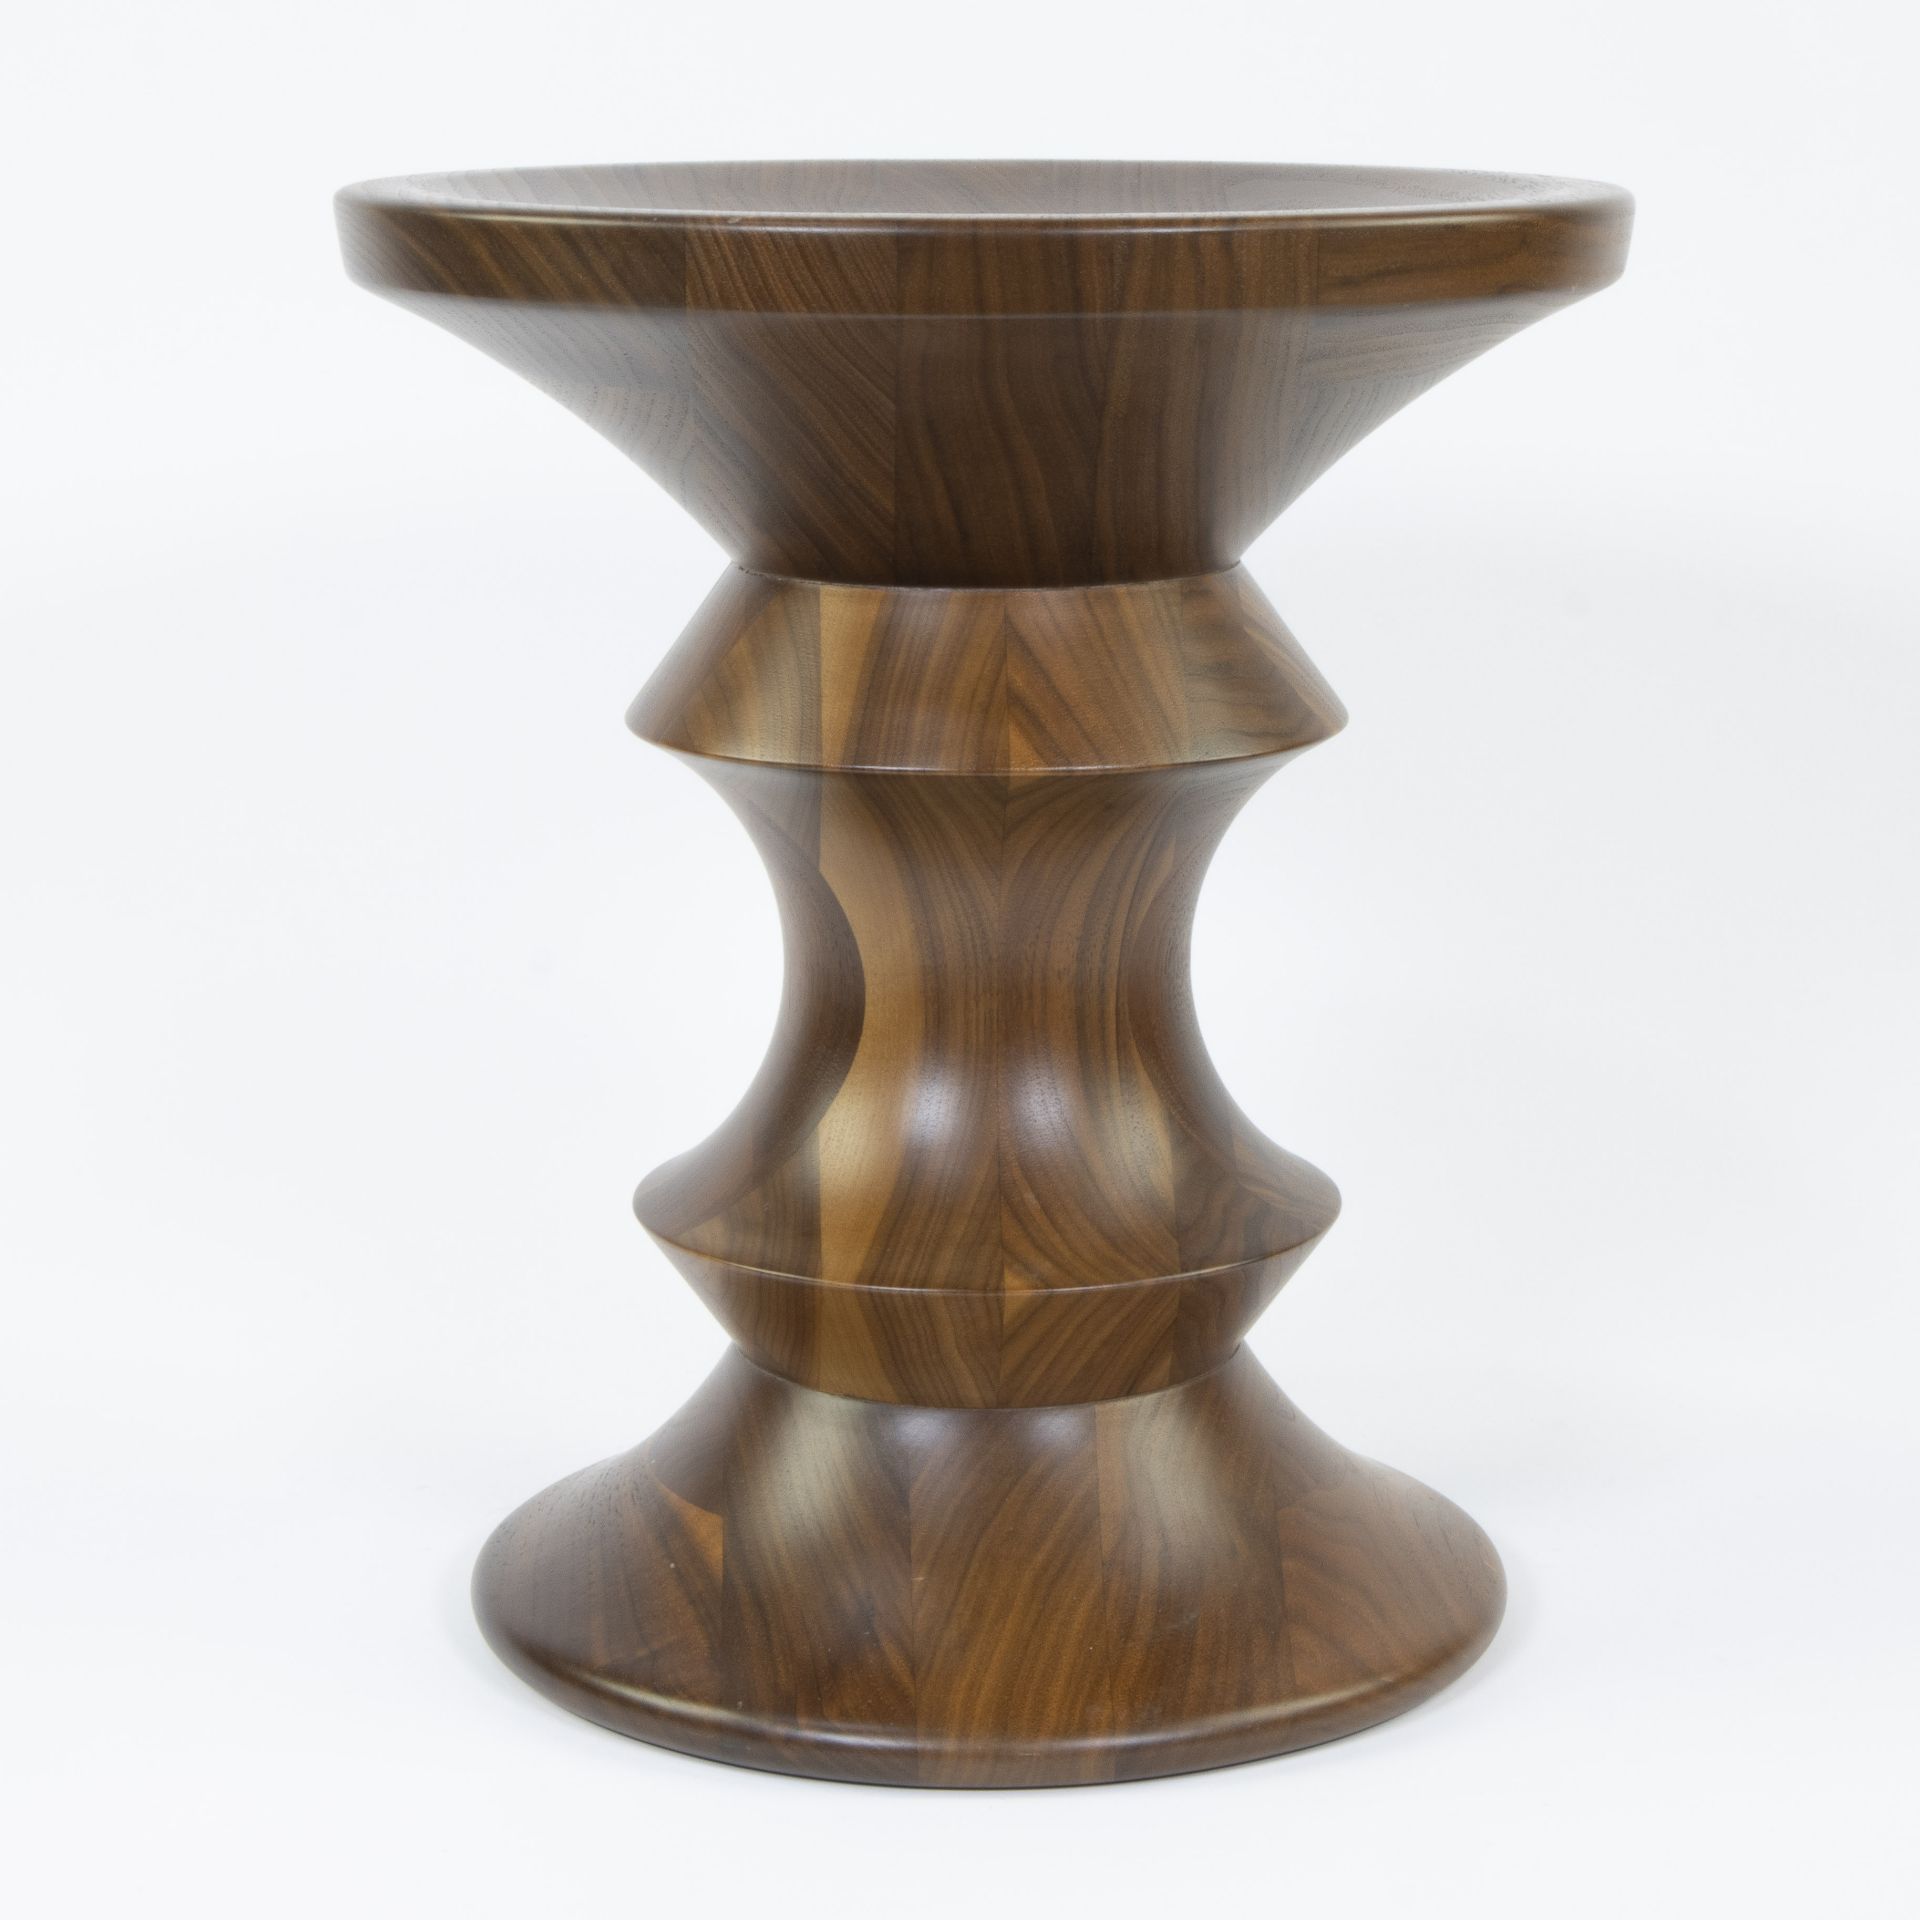 Eames stool in solid walnut, model B 1960, published by Vitra, design by Charles and Ray Eames - Bild 2 aus 6